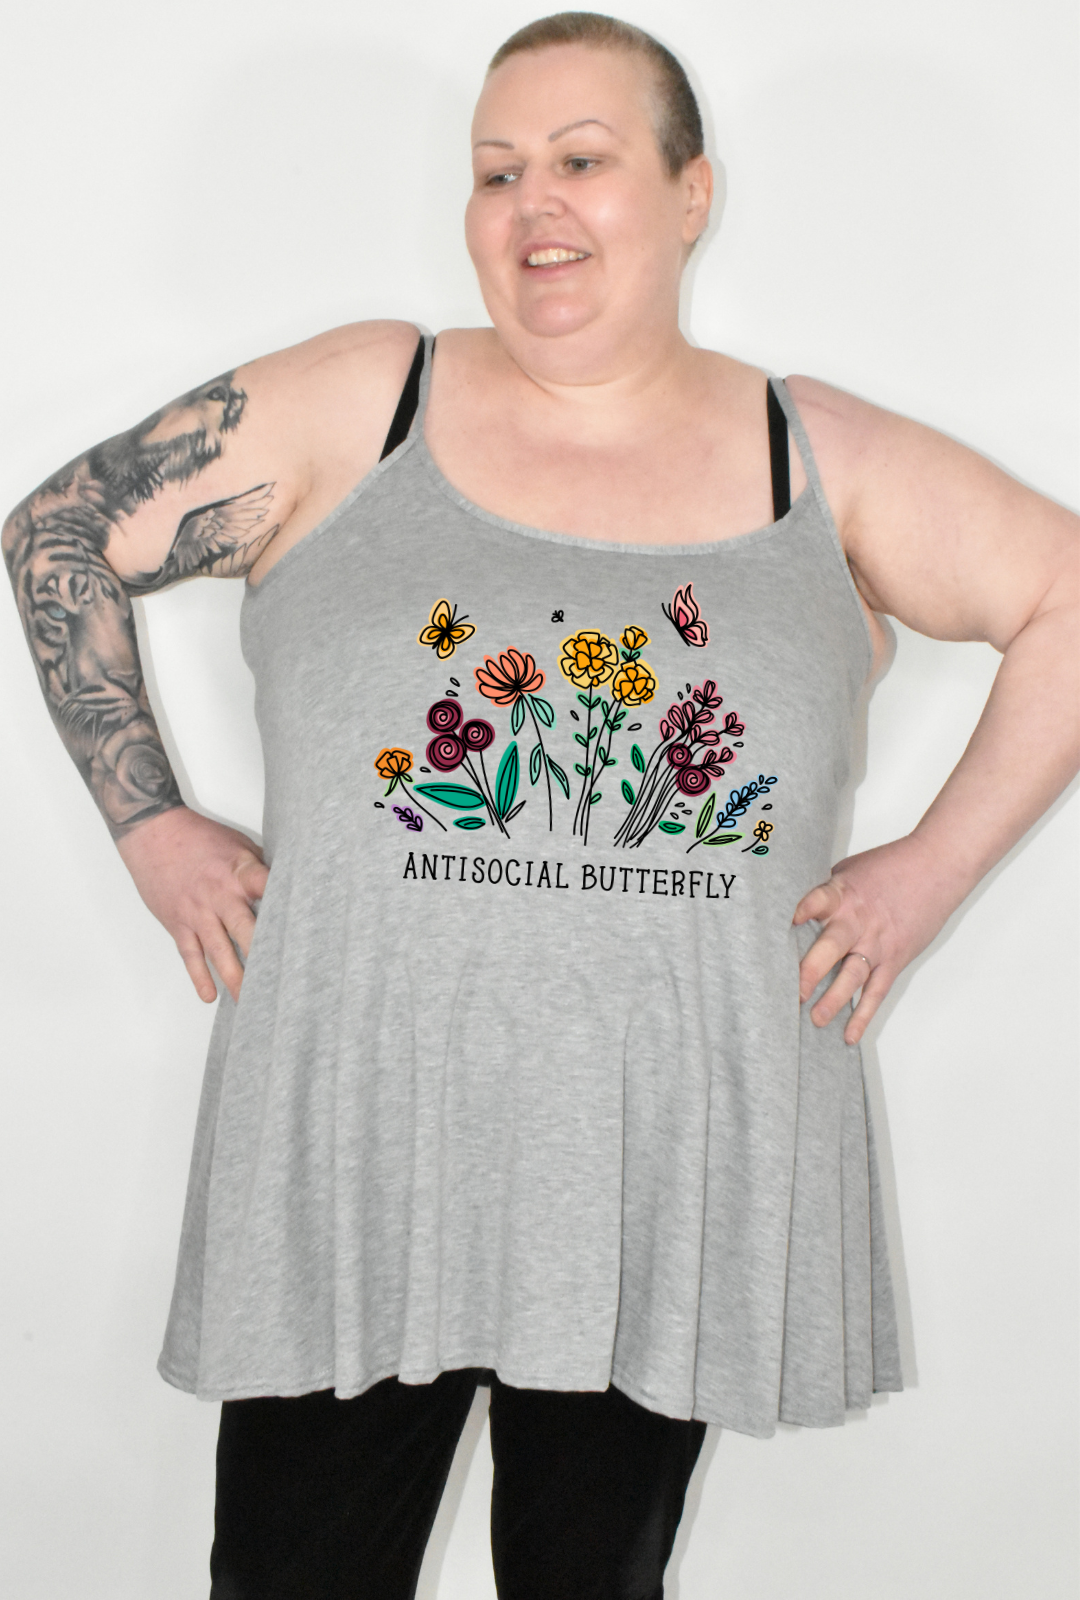 Light Grey "Antisocial Butterfly" Printed Longline Camisole